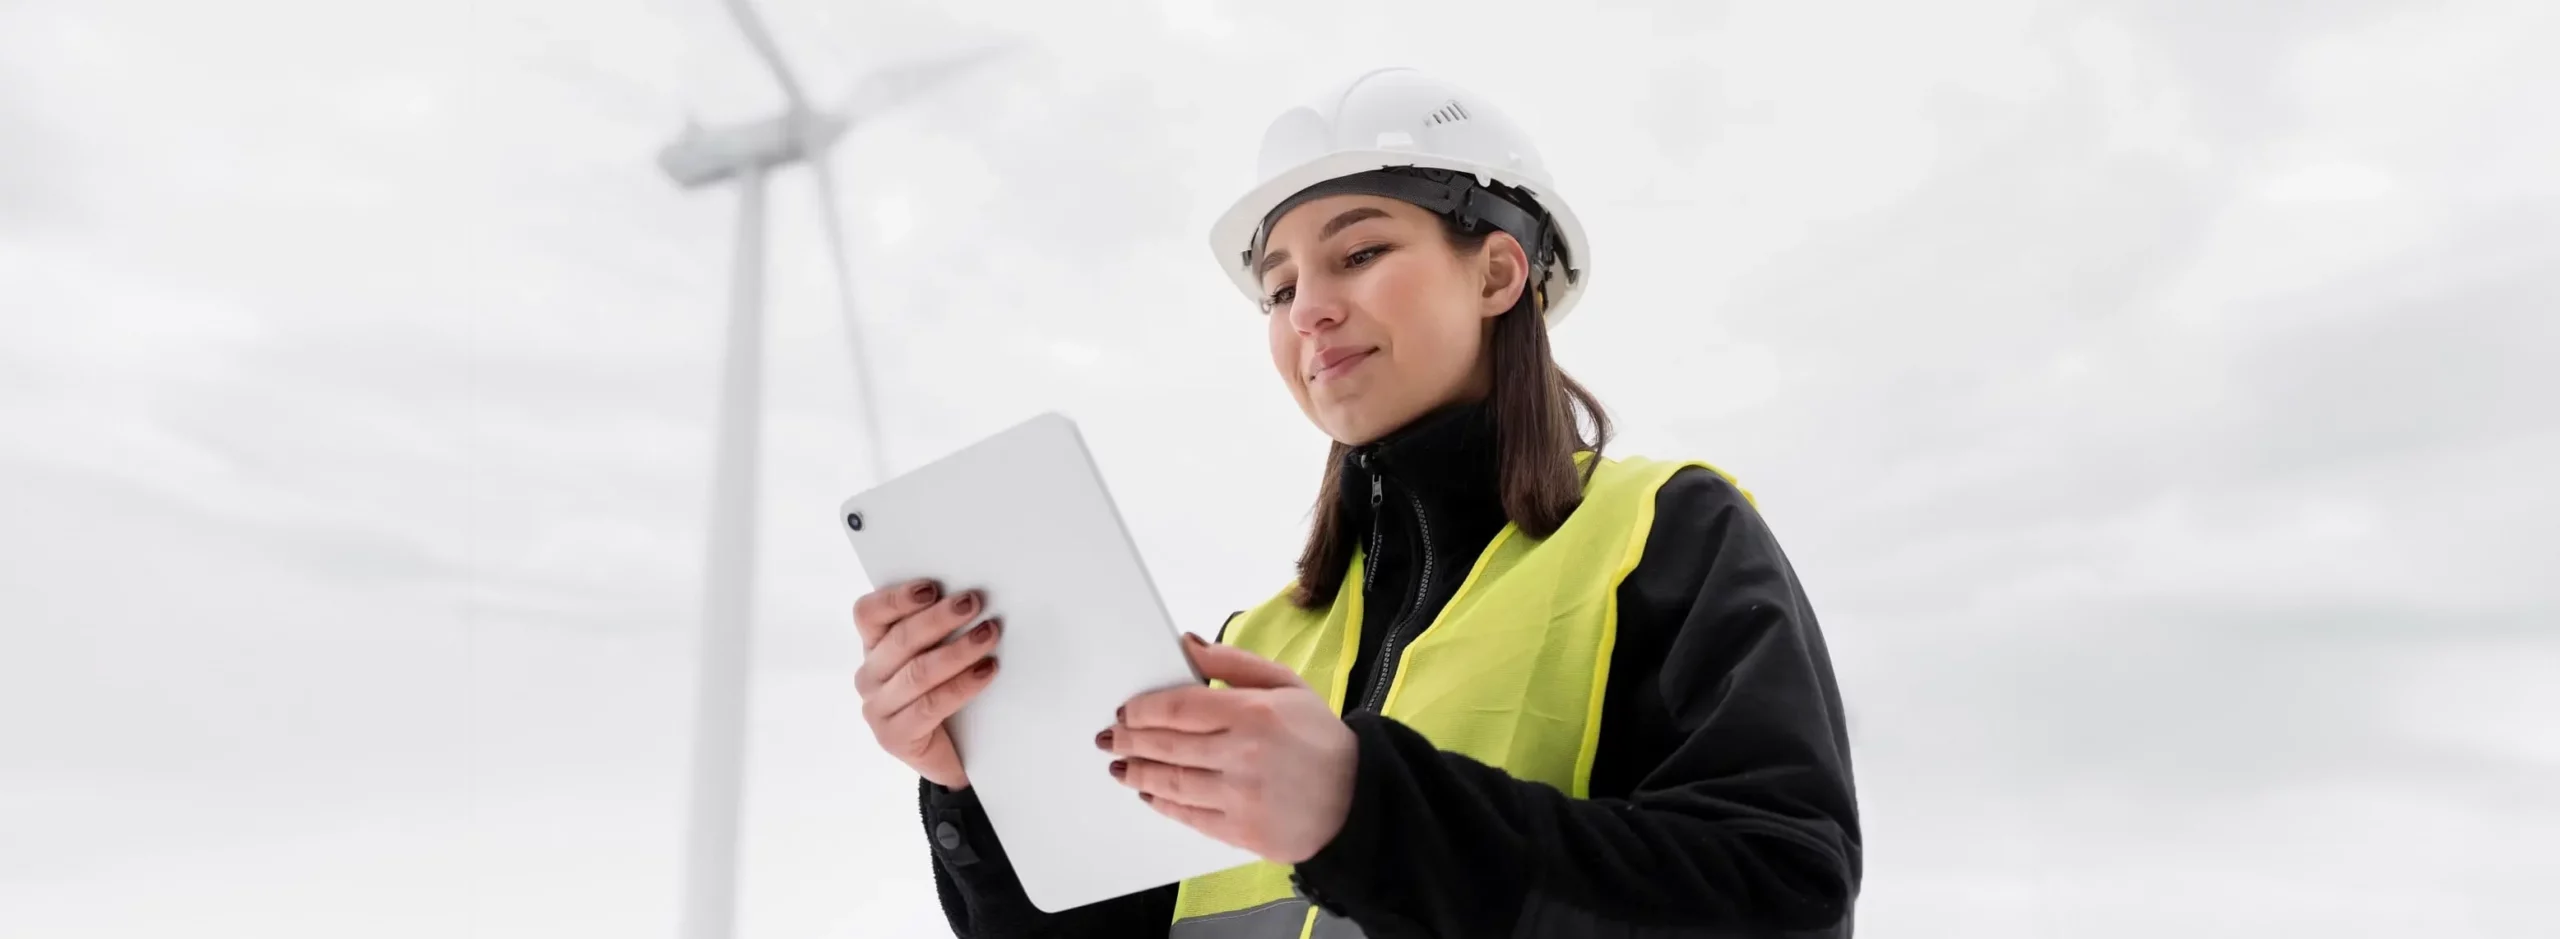 Woman holding a tablet, wind turbine in the background